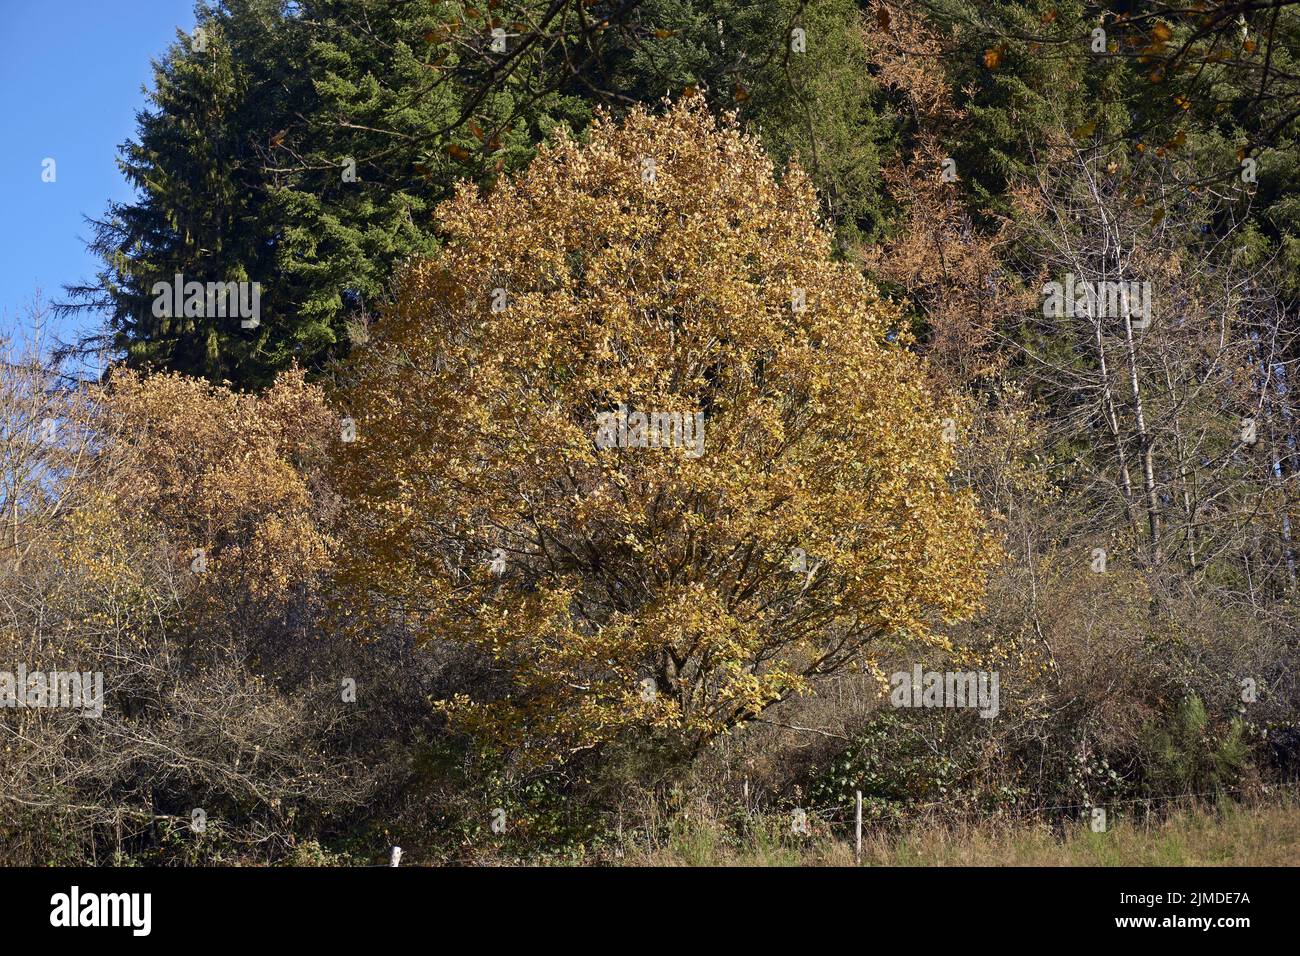 Autumn beech leaves, yellow leaves on branches against blue sky with plenty copy space. Stock Photo